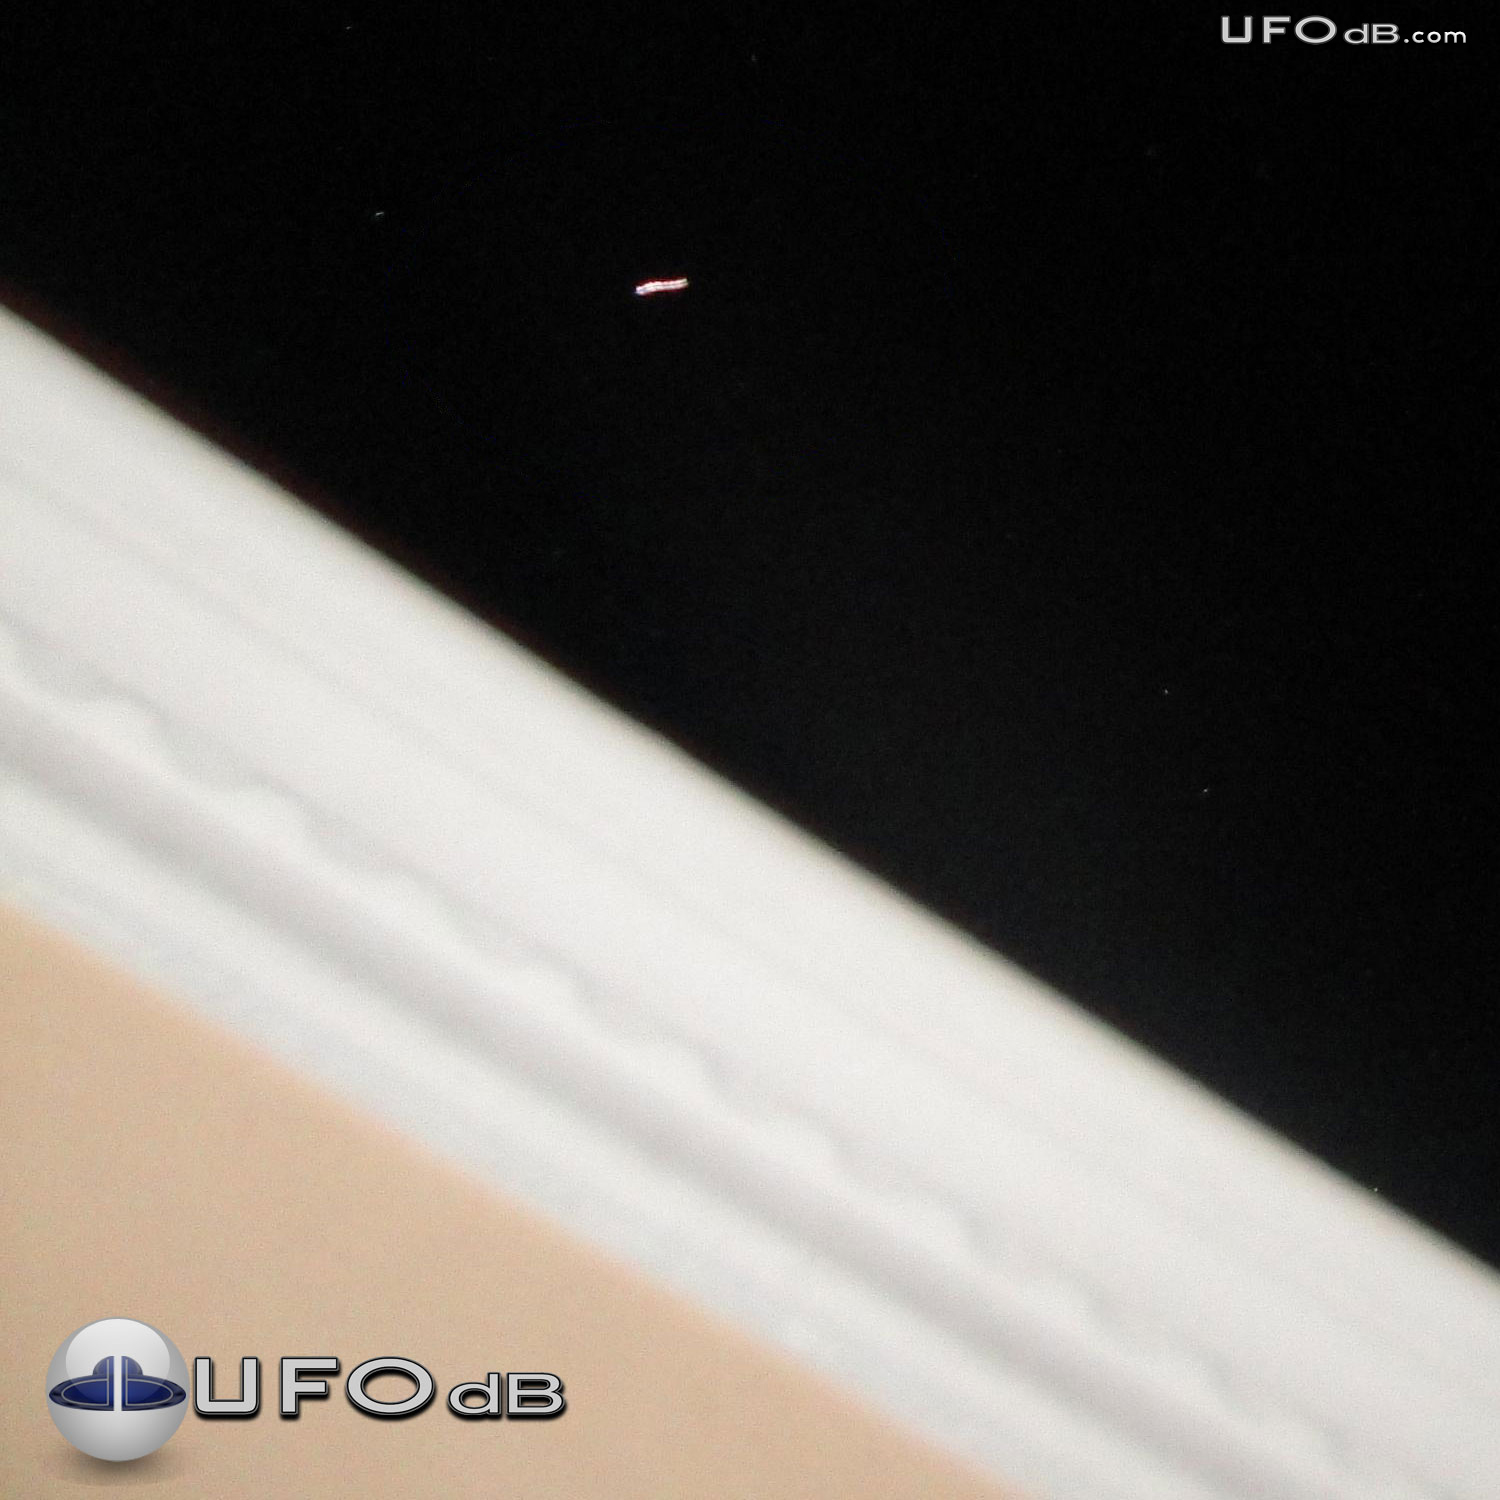 Bouncing UFO seen during Eclipse in Dominican Republic | December 2010 UFO Picture #313-1